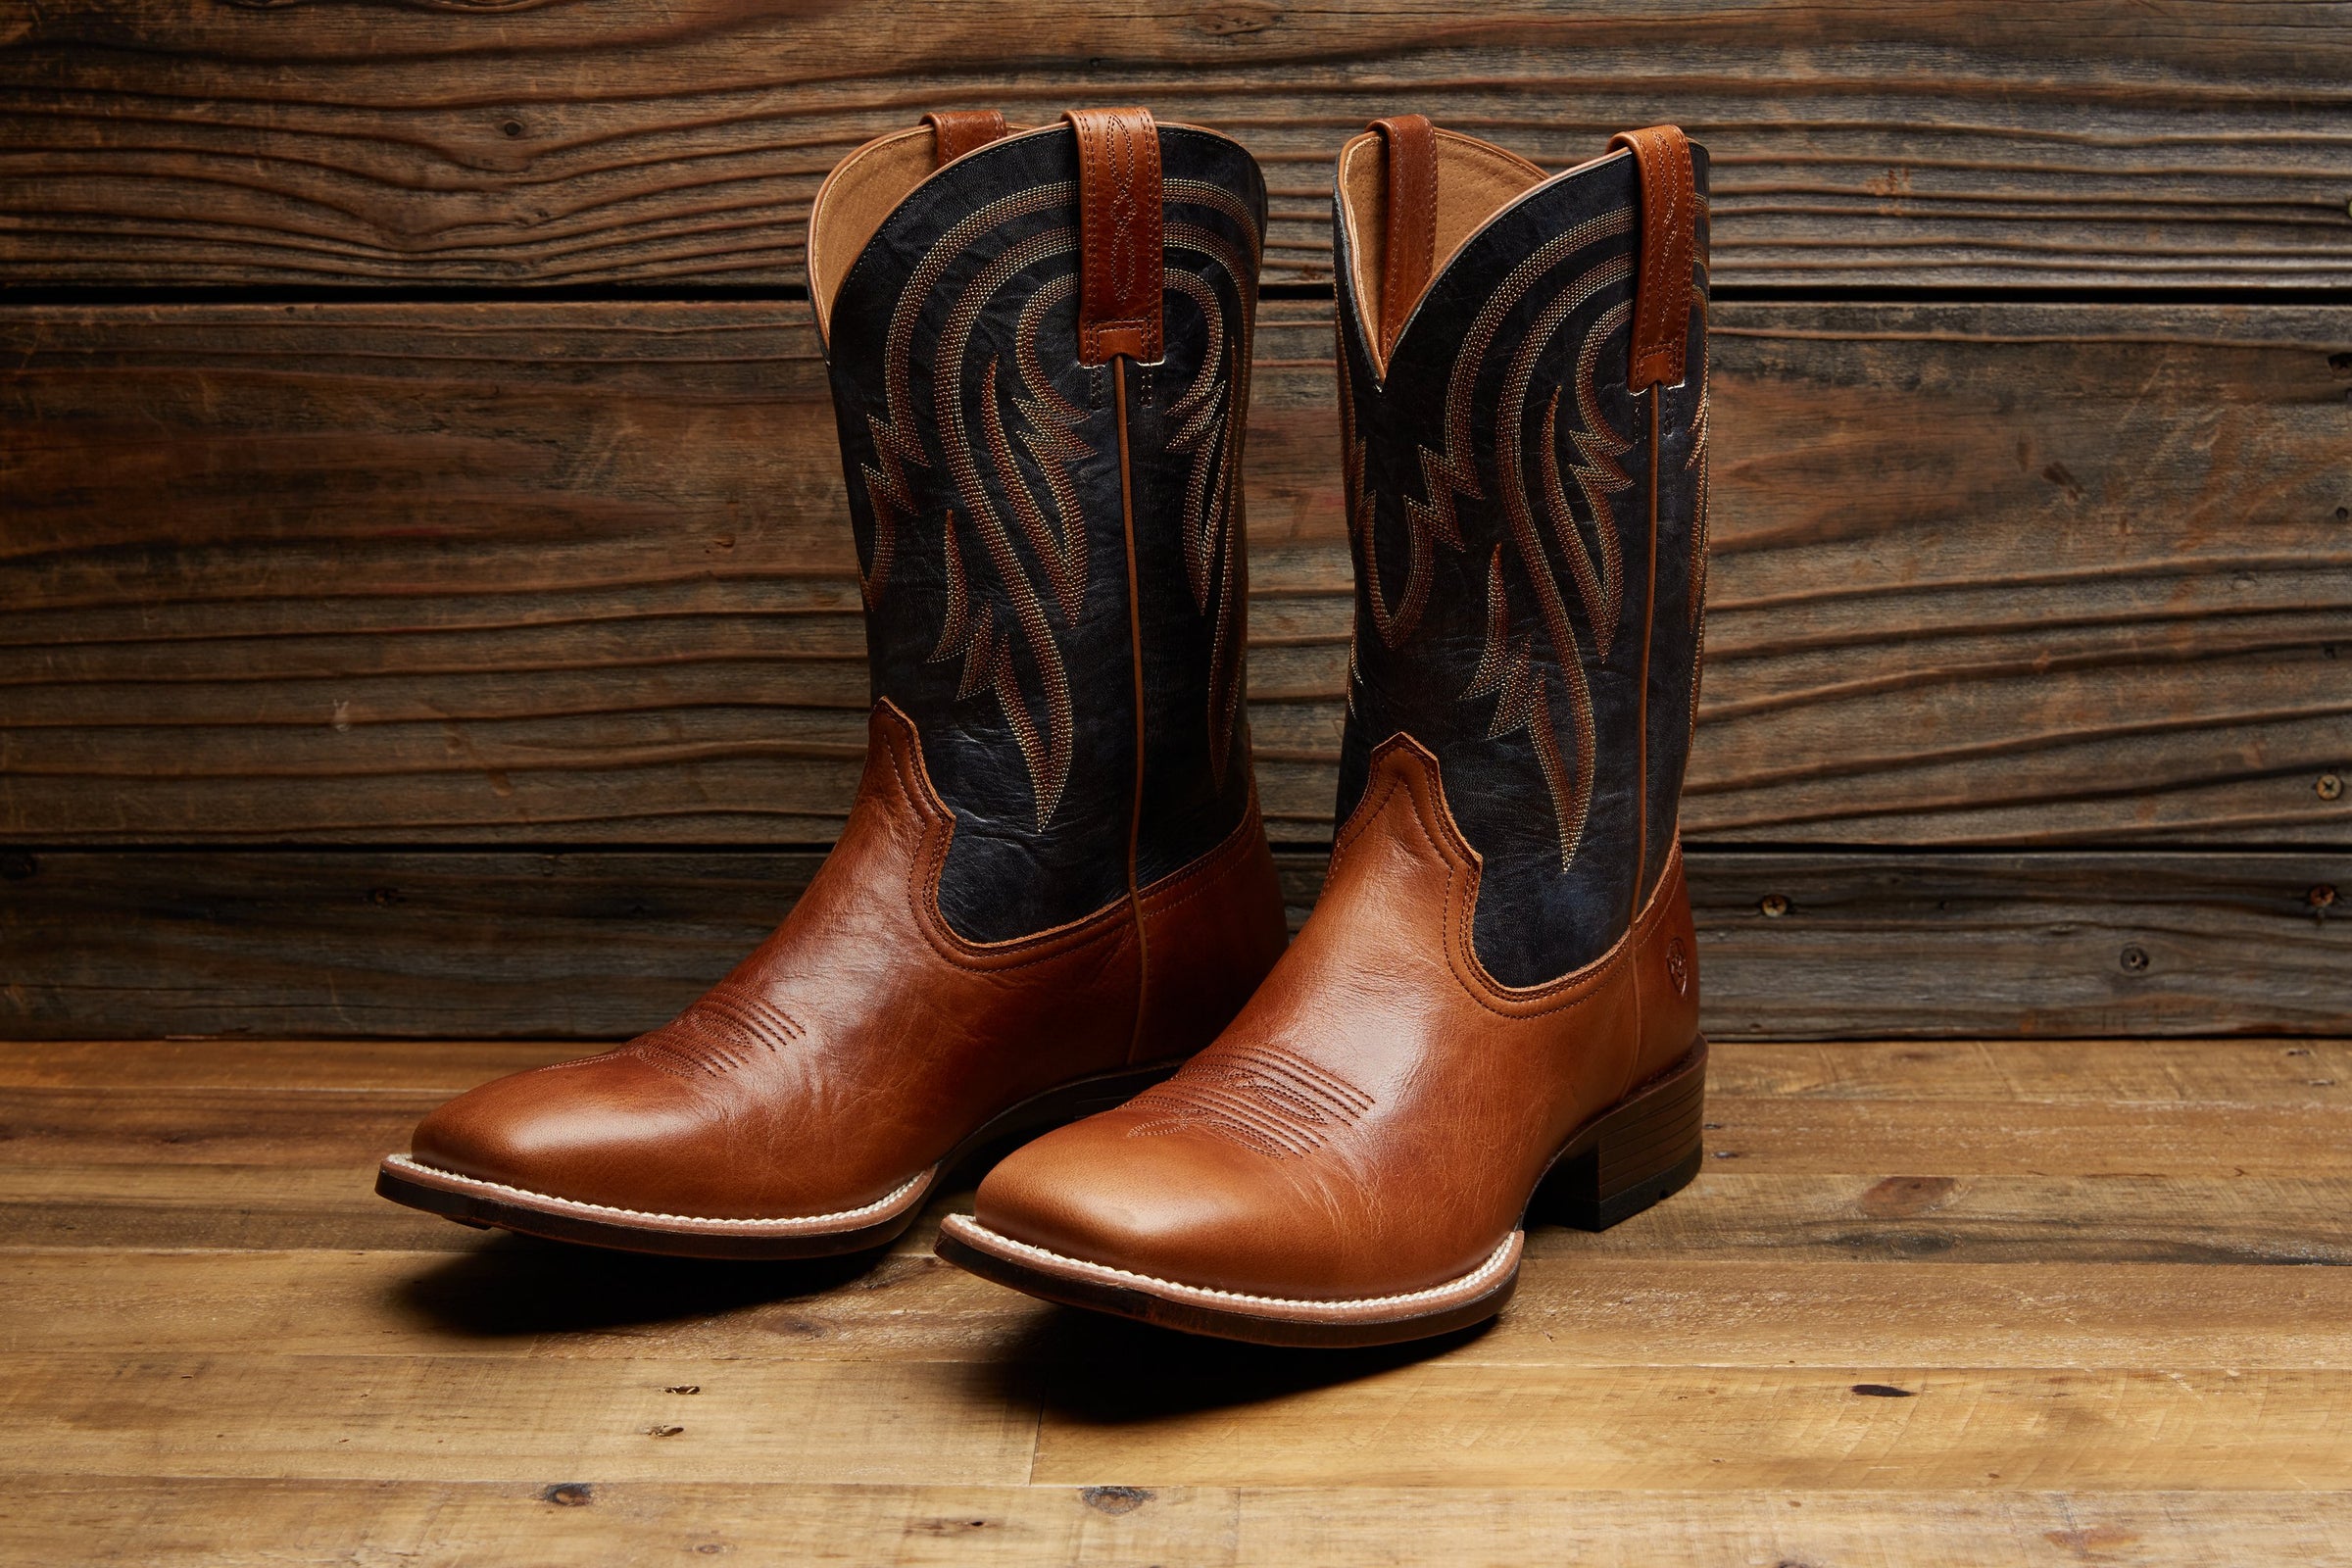 New Arrival of Ariat Cowboy Boots and Shoes for Men and Women in Australia